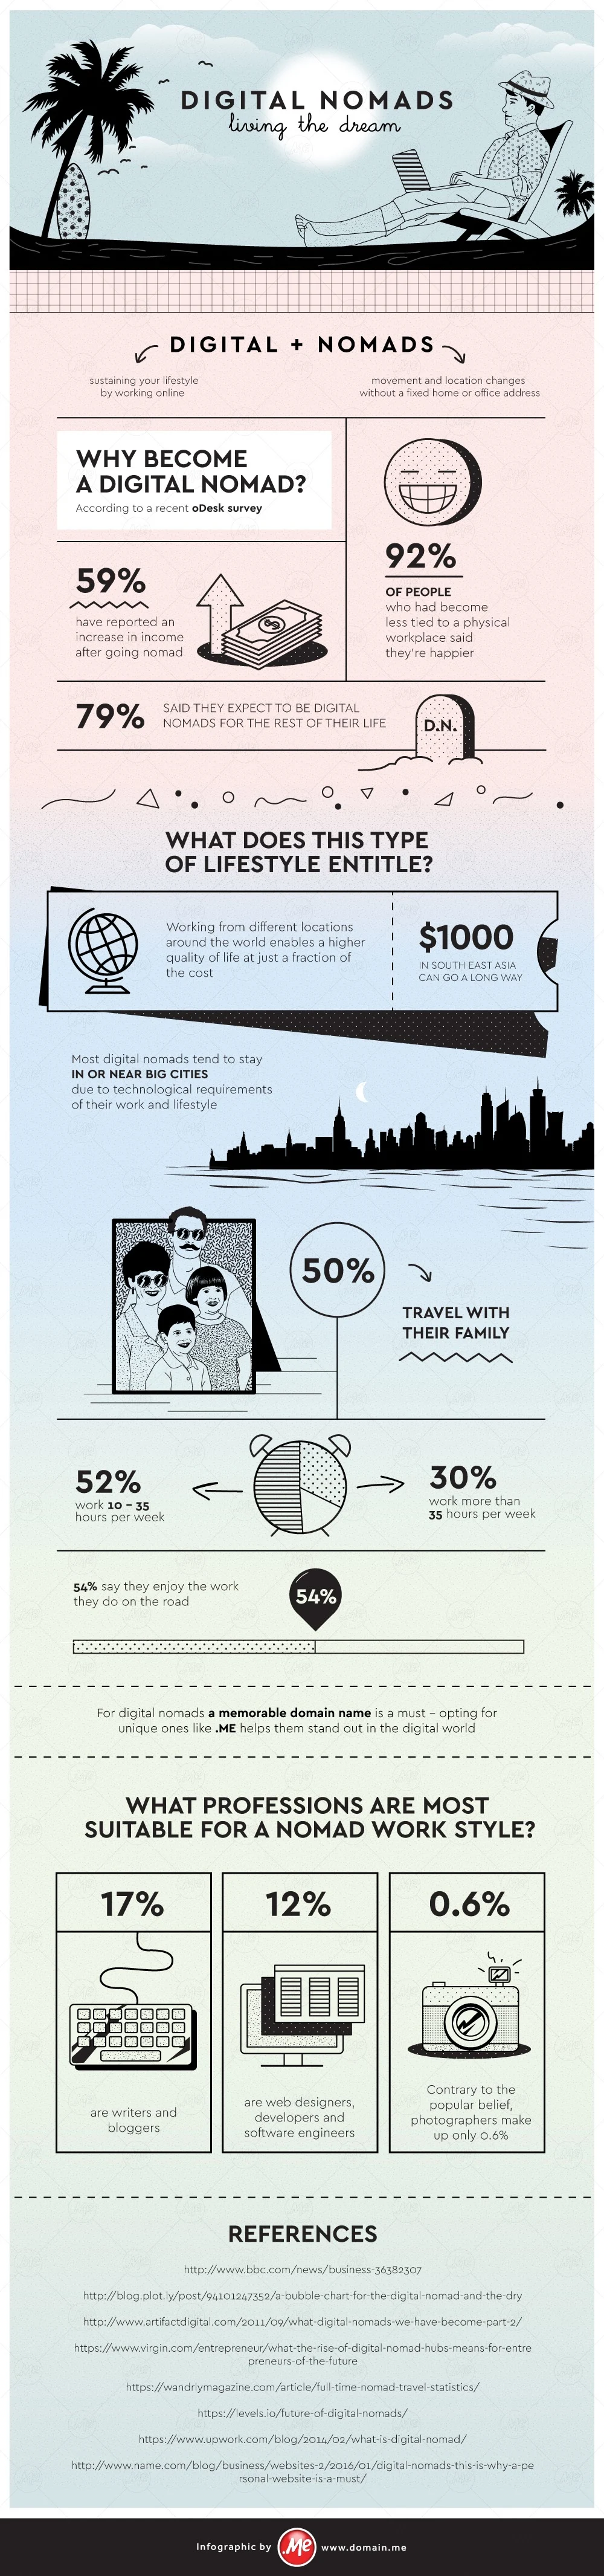 Digital Nomads – Living the Dream - #infographic